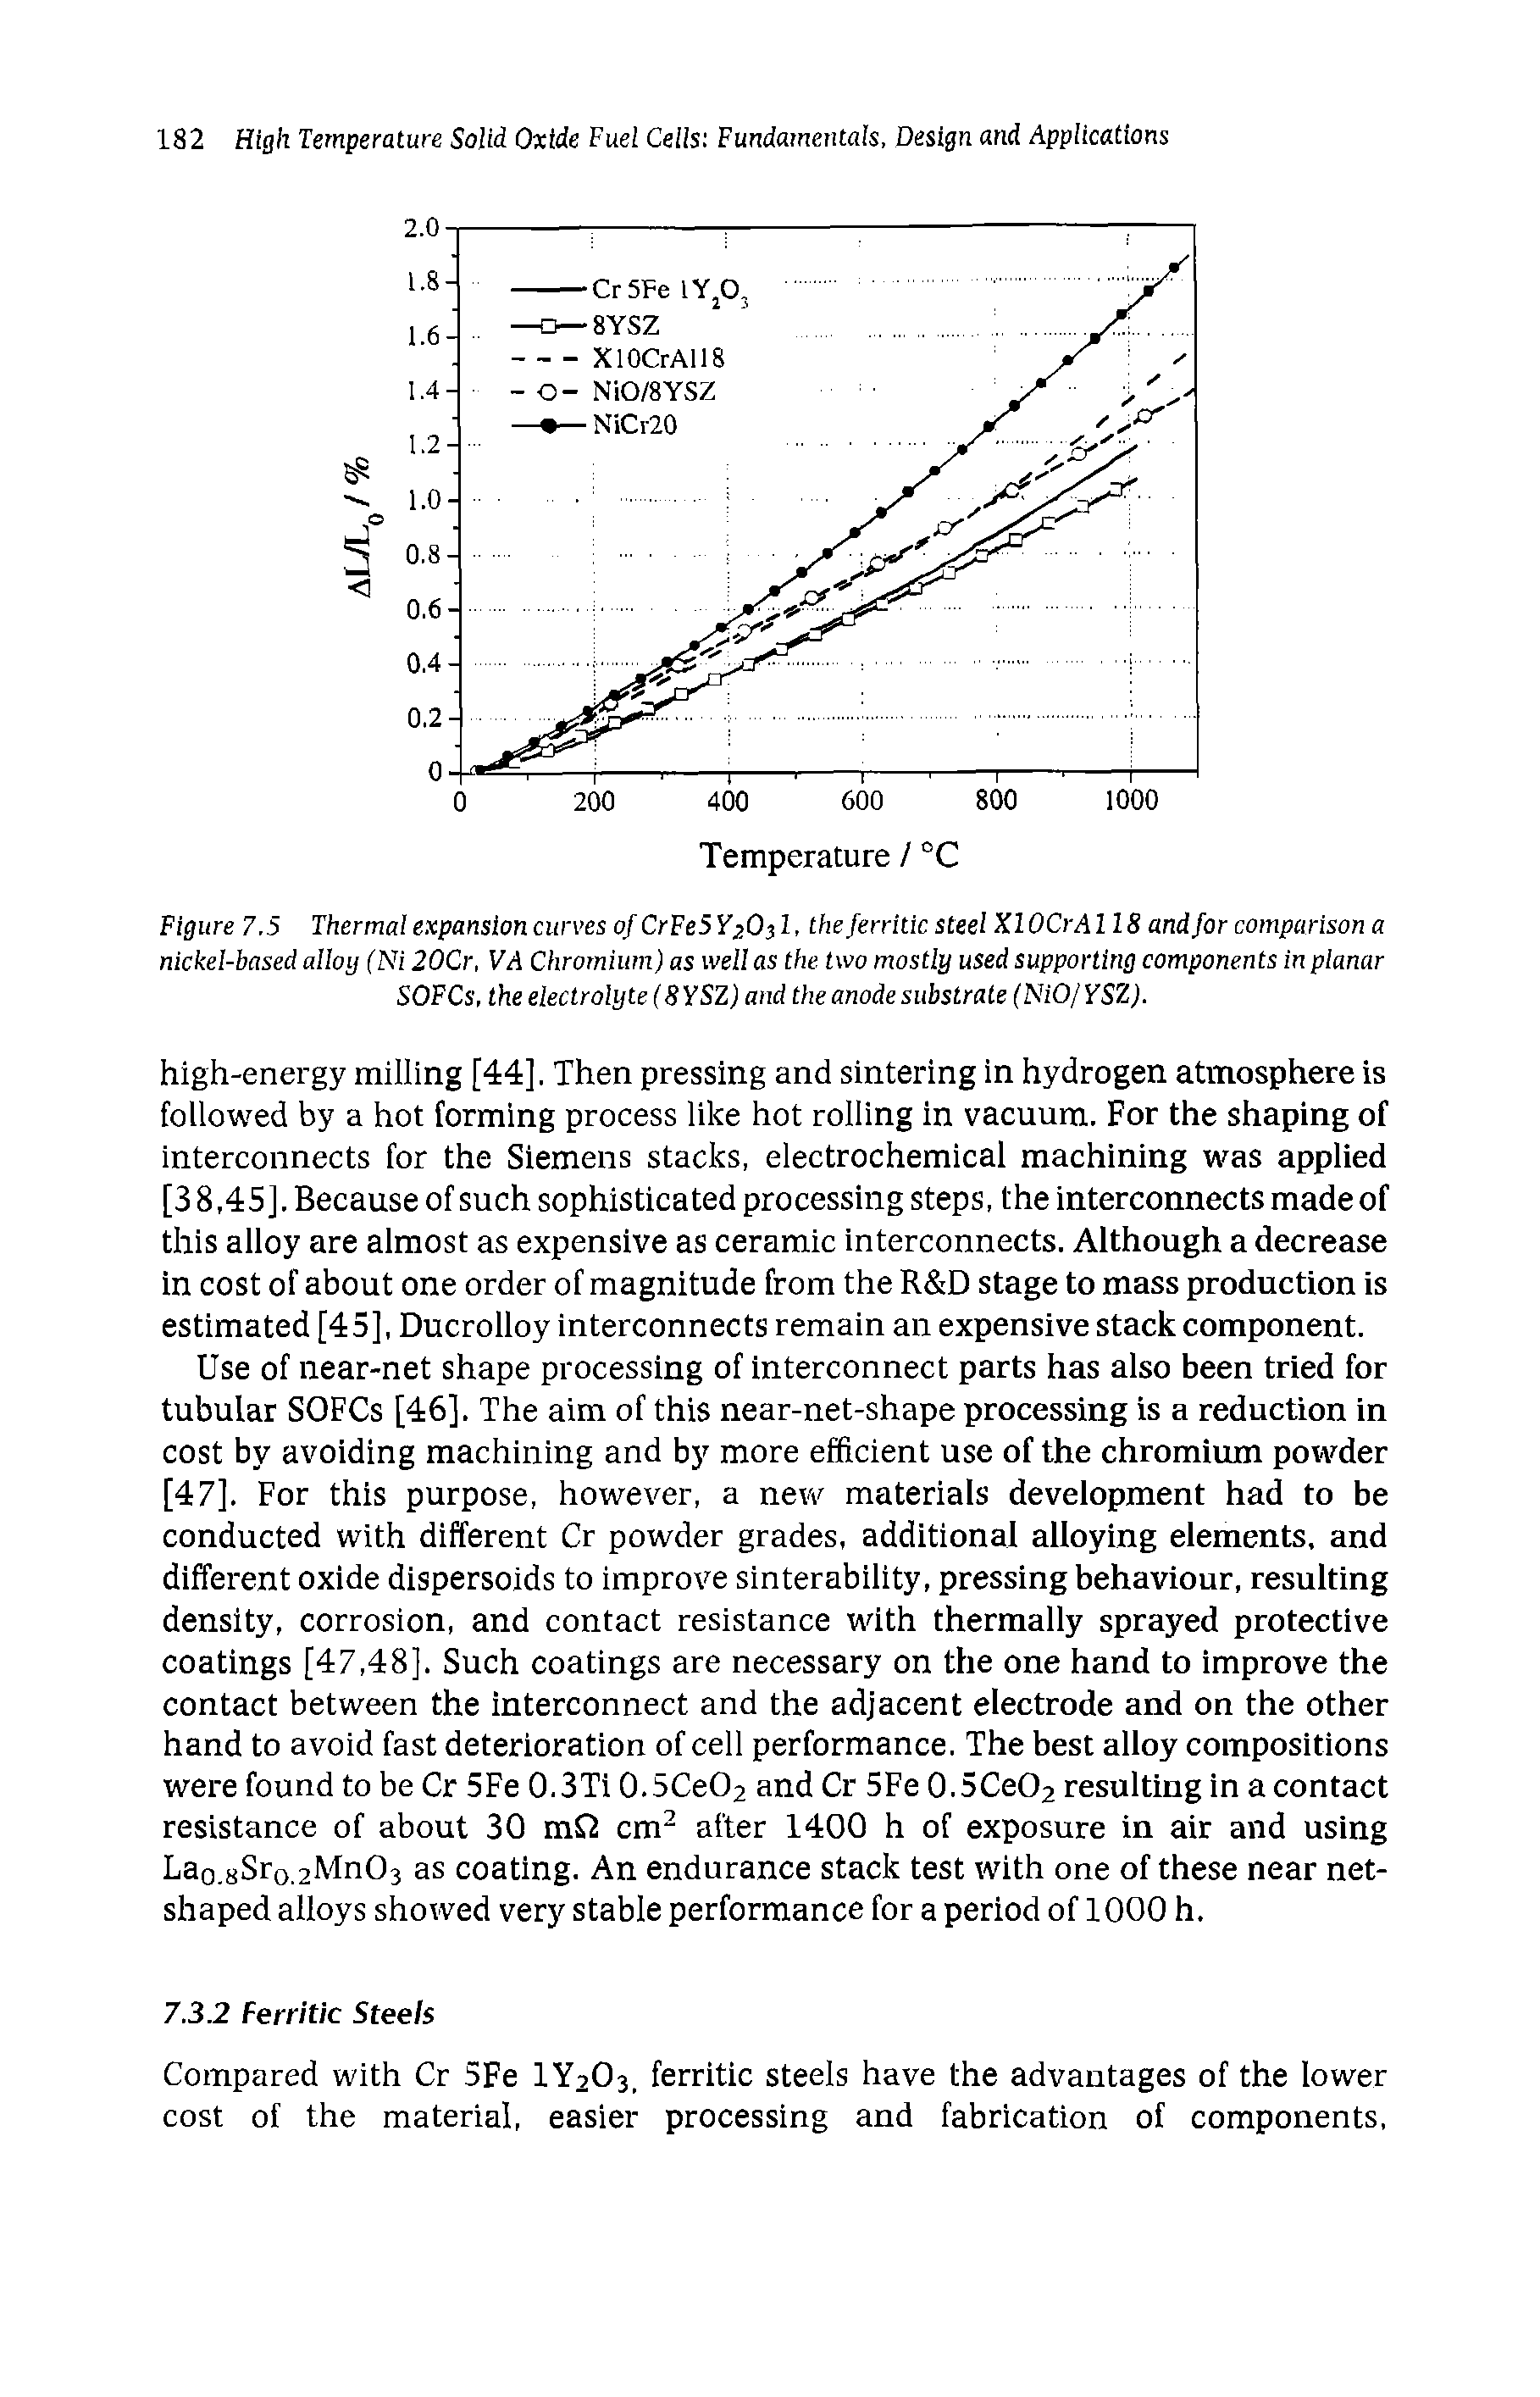 Figure 7.5 Thermal expansion curves of CrFeS Y O) 1, the ferritic steel XlOCrA 118 and for comparison a nickel-based alloy (Ni 20Cr, VA Chromium) as well as the two mostly used supporting components in planar SOFCs, the electrolyte (8YSZ)and the anode substrate (NiO/ YSZ).